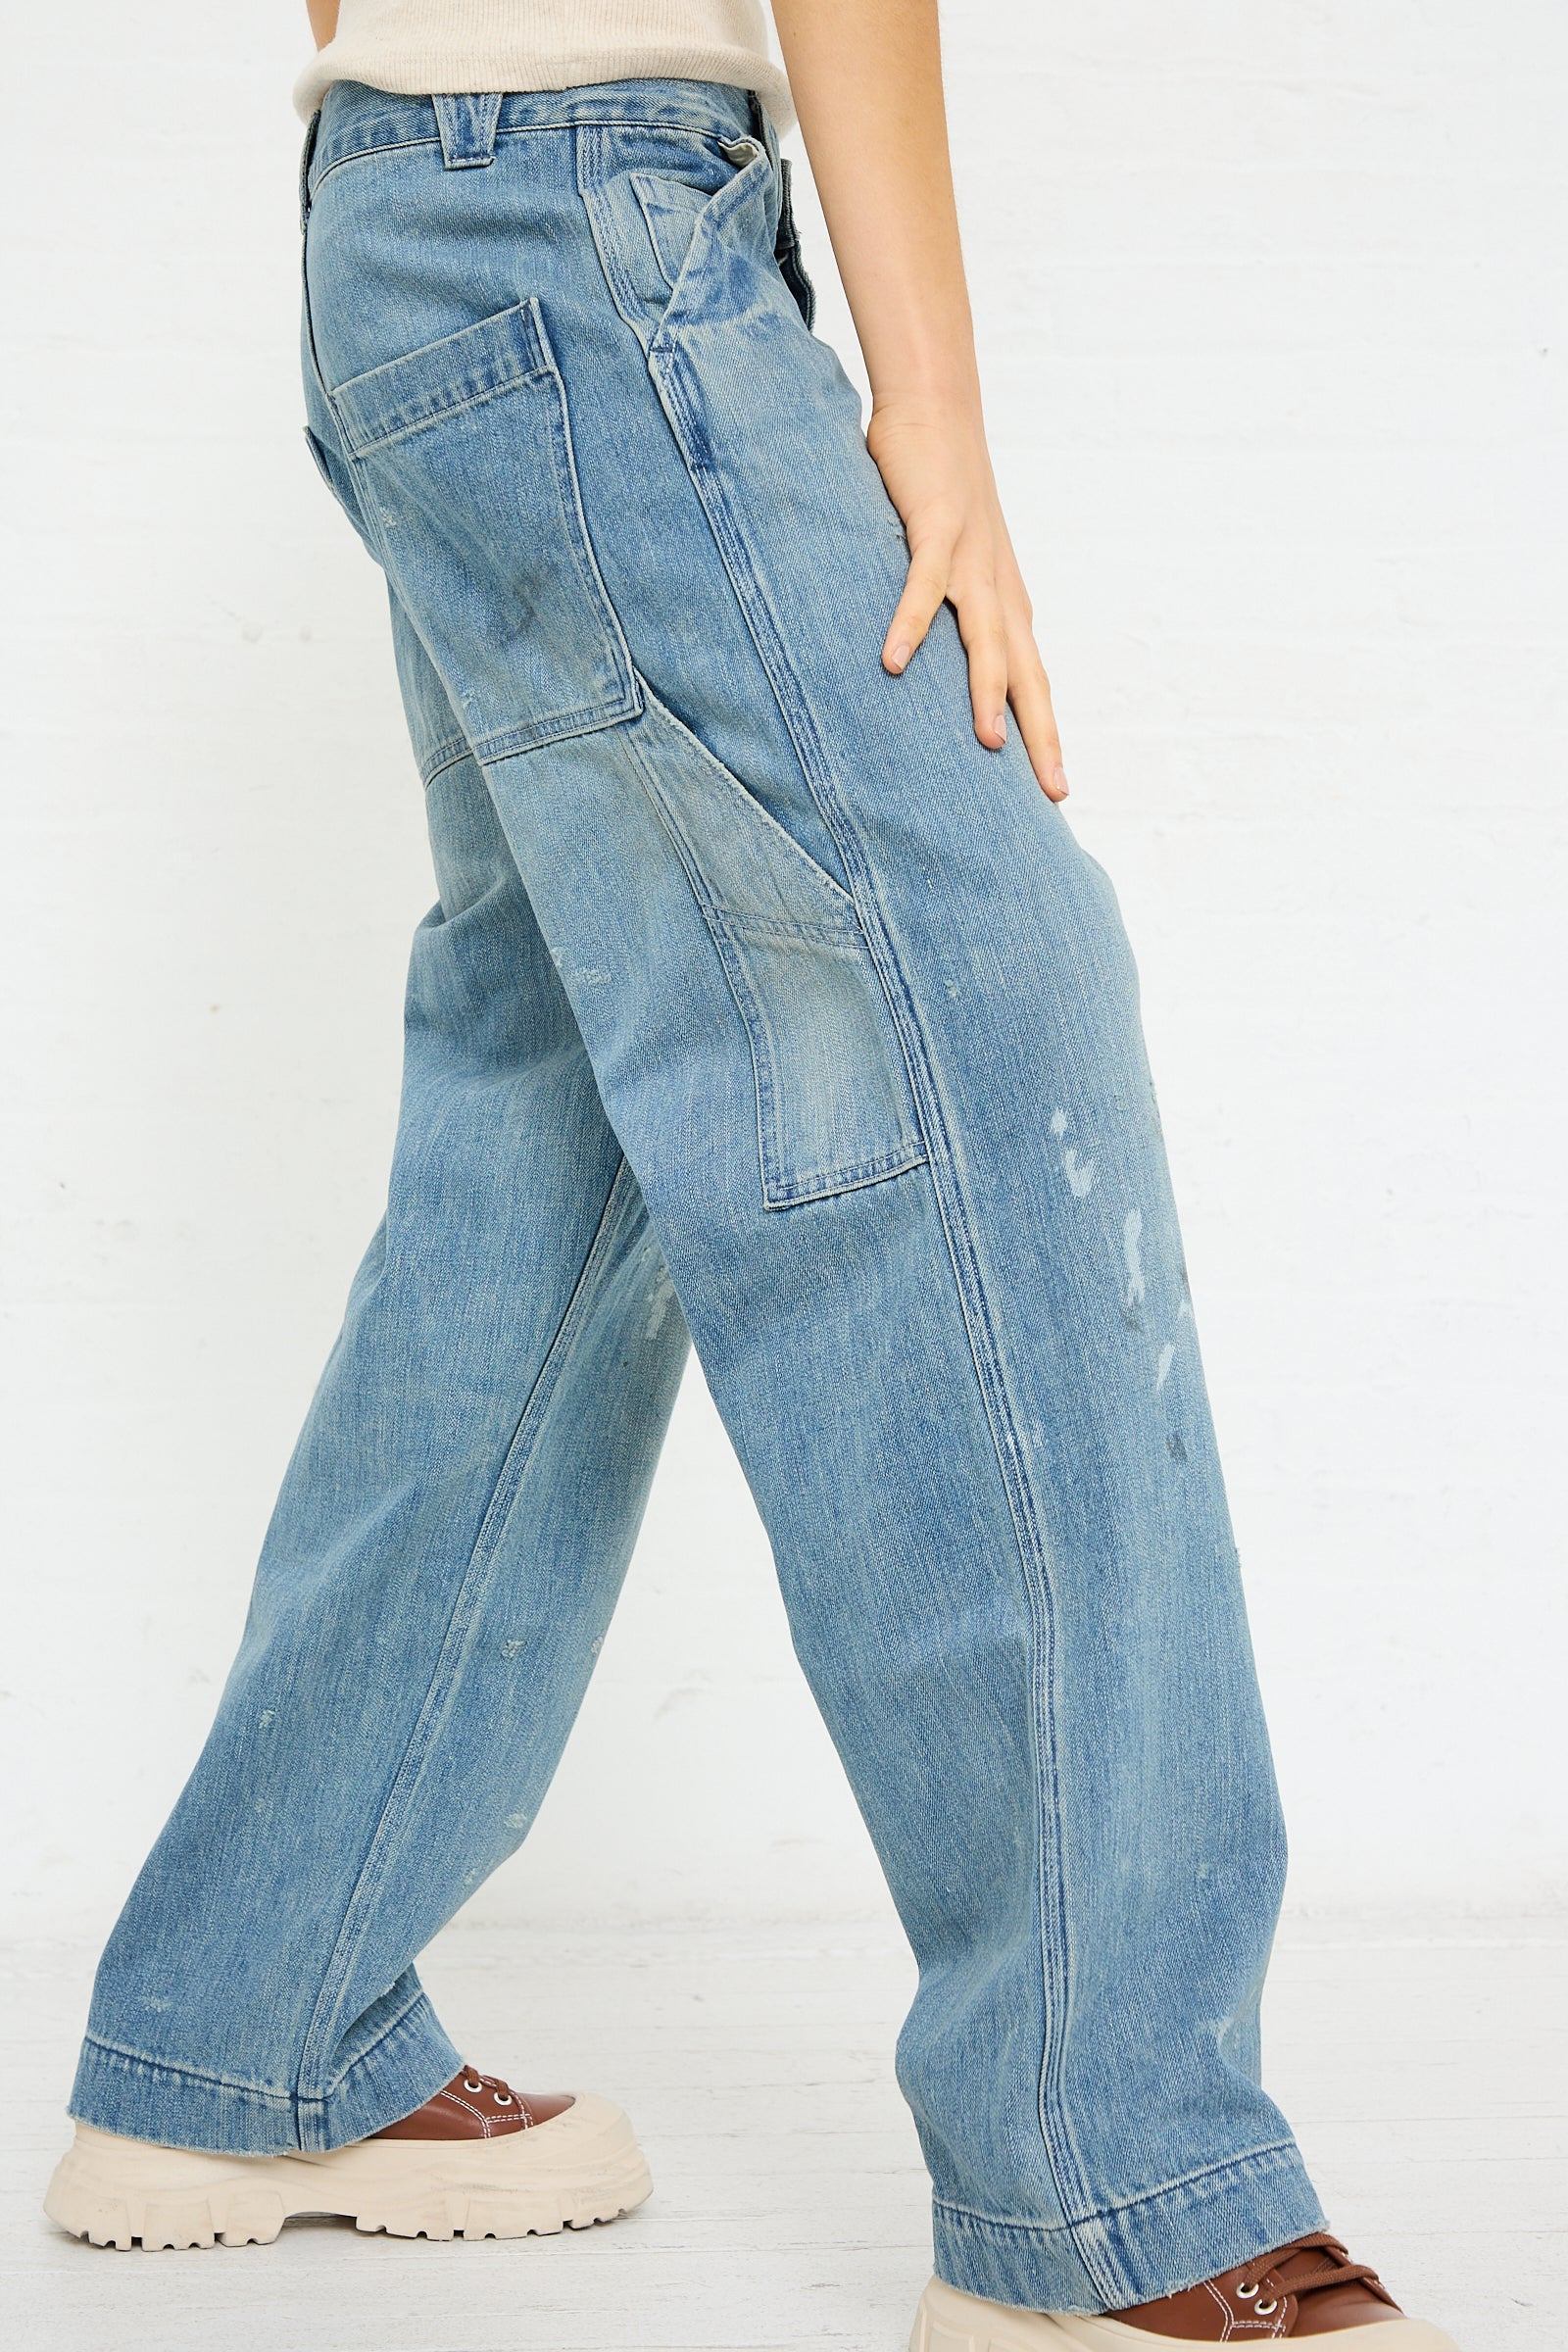 A person wearing Chimala's Denim Painter Pant in Vintage Wash and two-tone shoes.